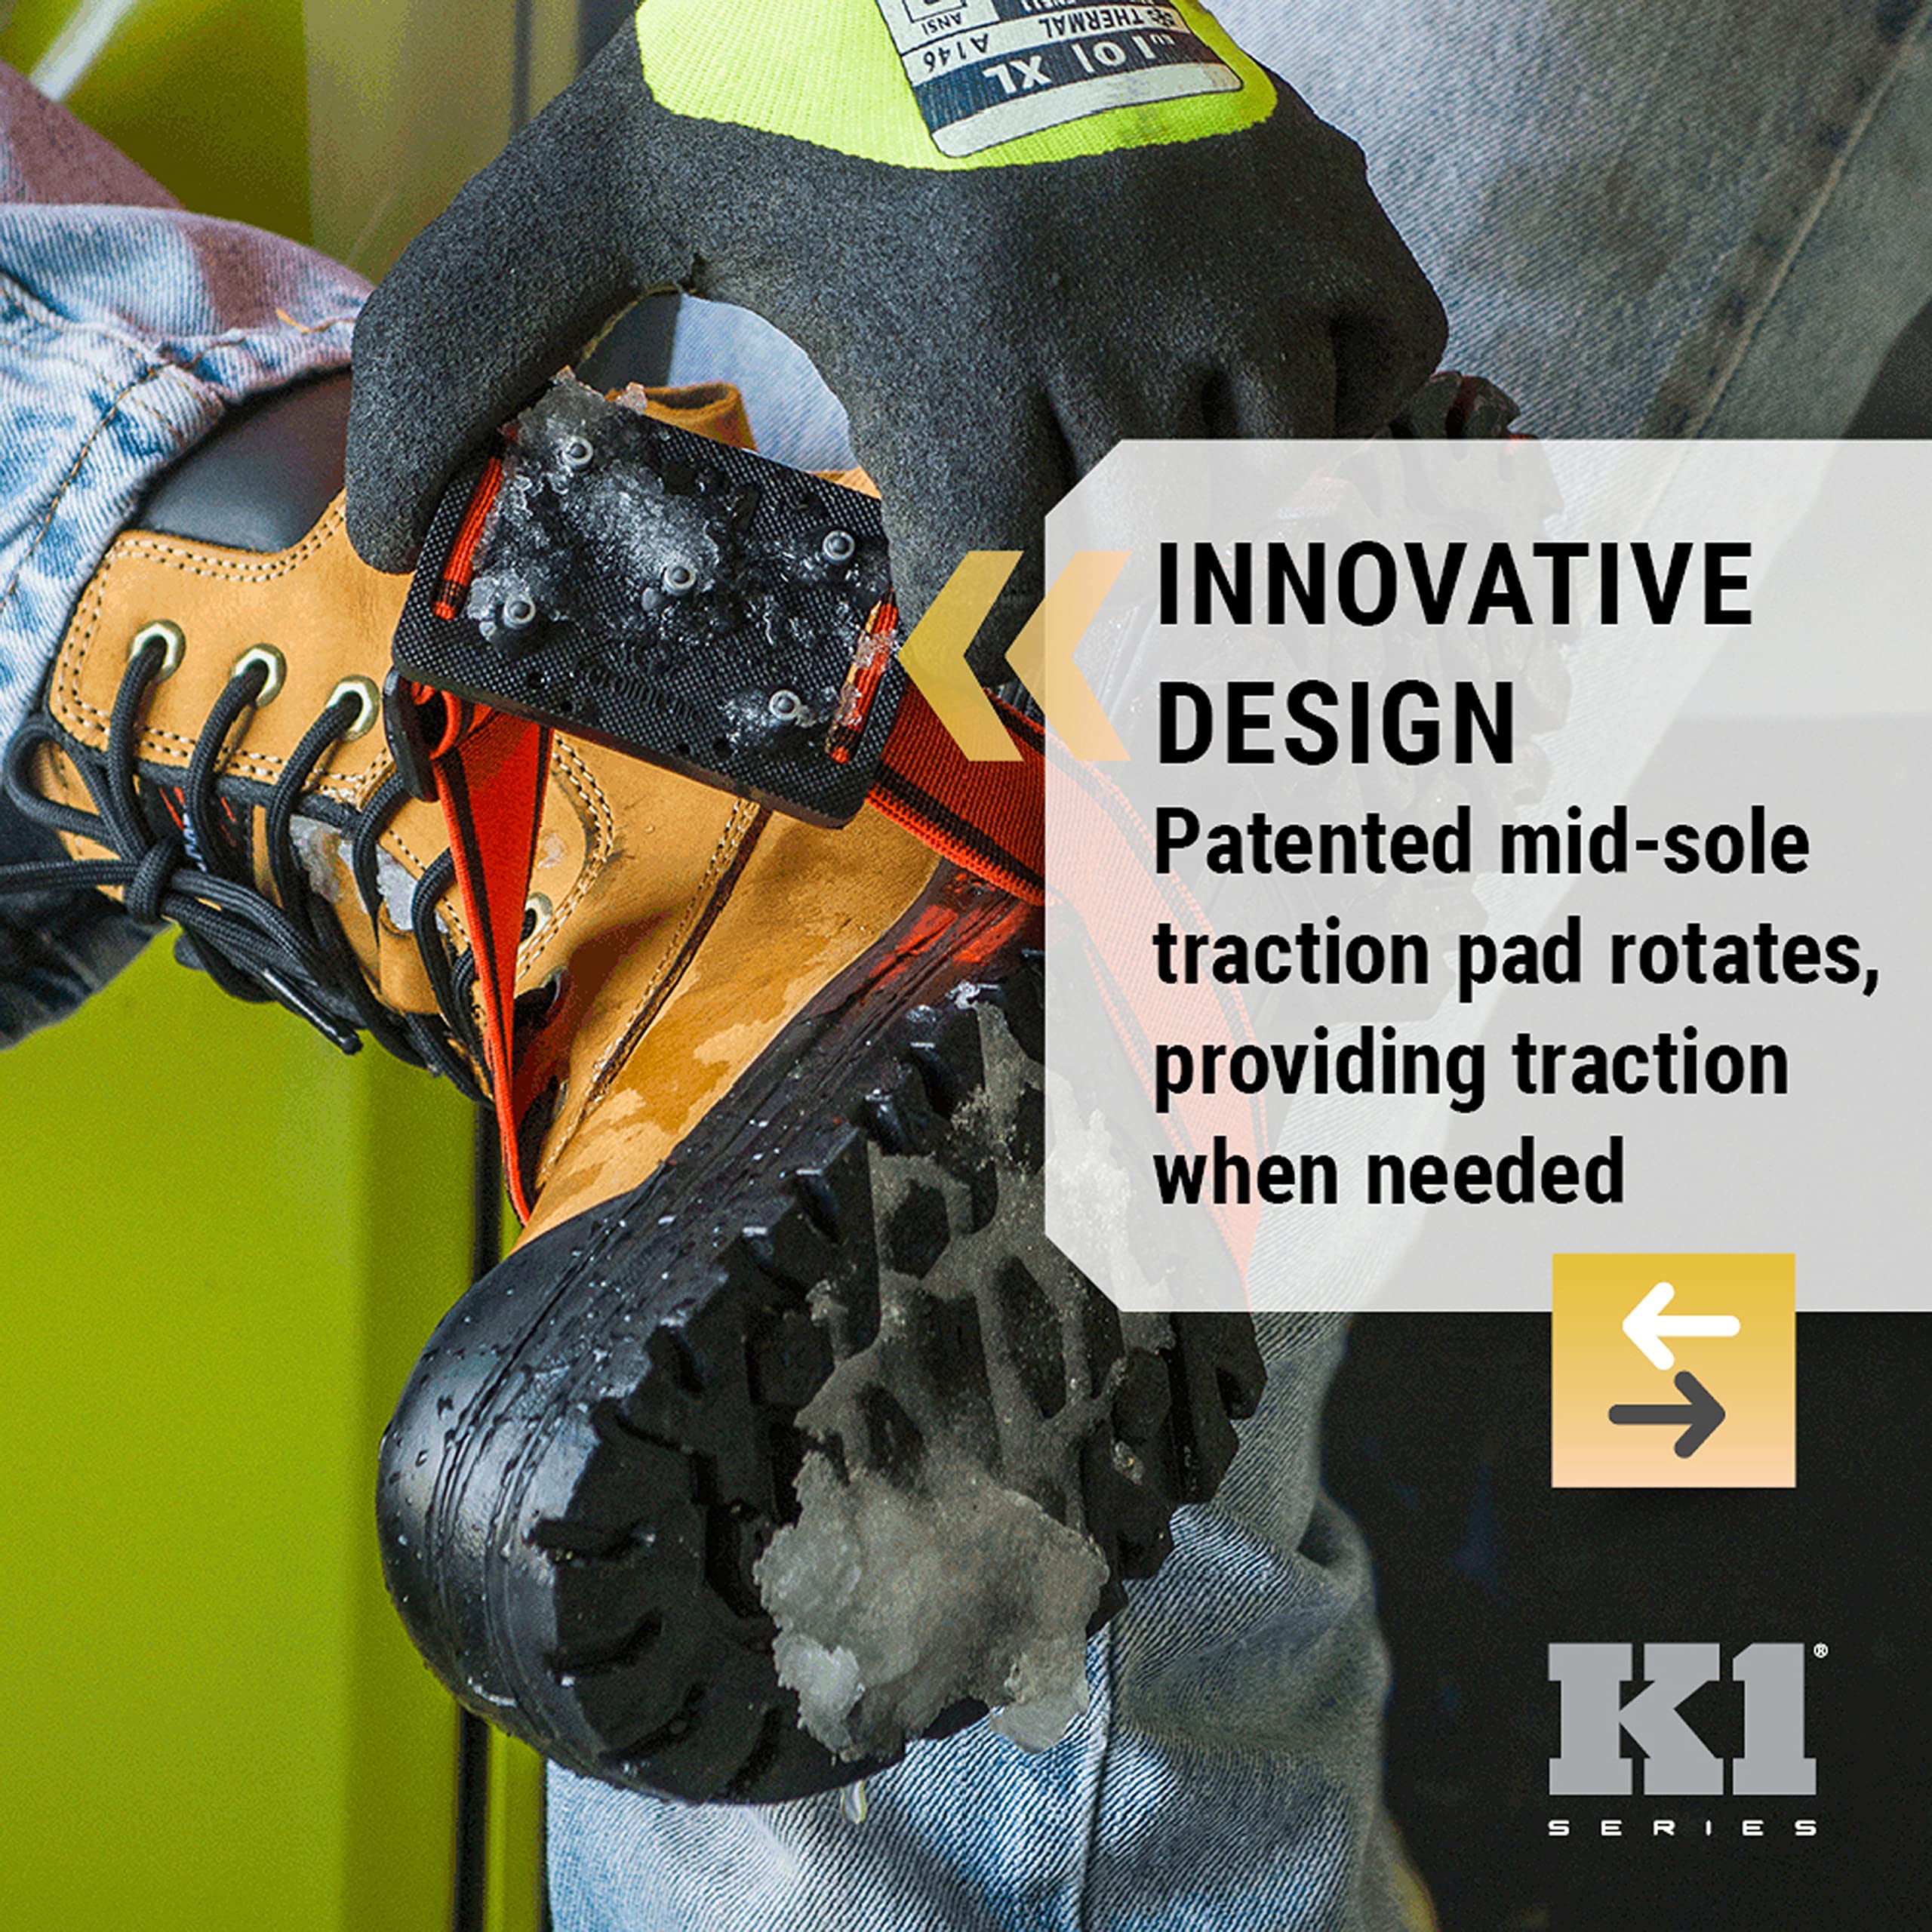 K1 Mid-Sole Ice Cleats - Easily Rotate Traction Cleats for Frequent Indoor/Outdoor Transition, Driving, or Climbing (1 Pair)